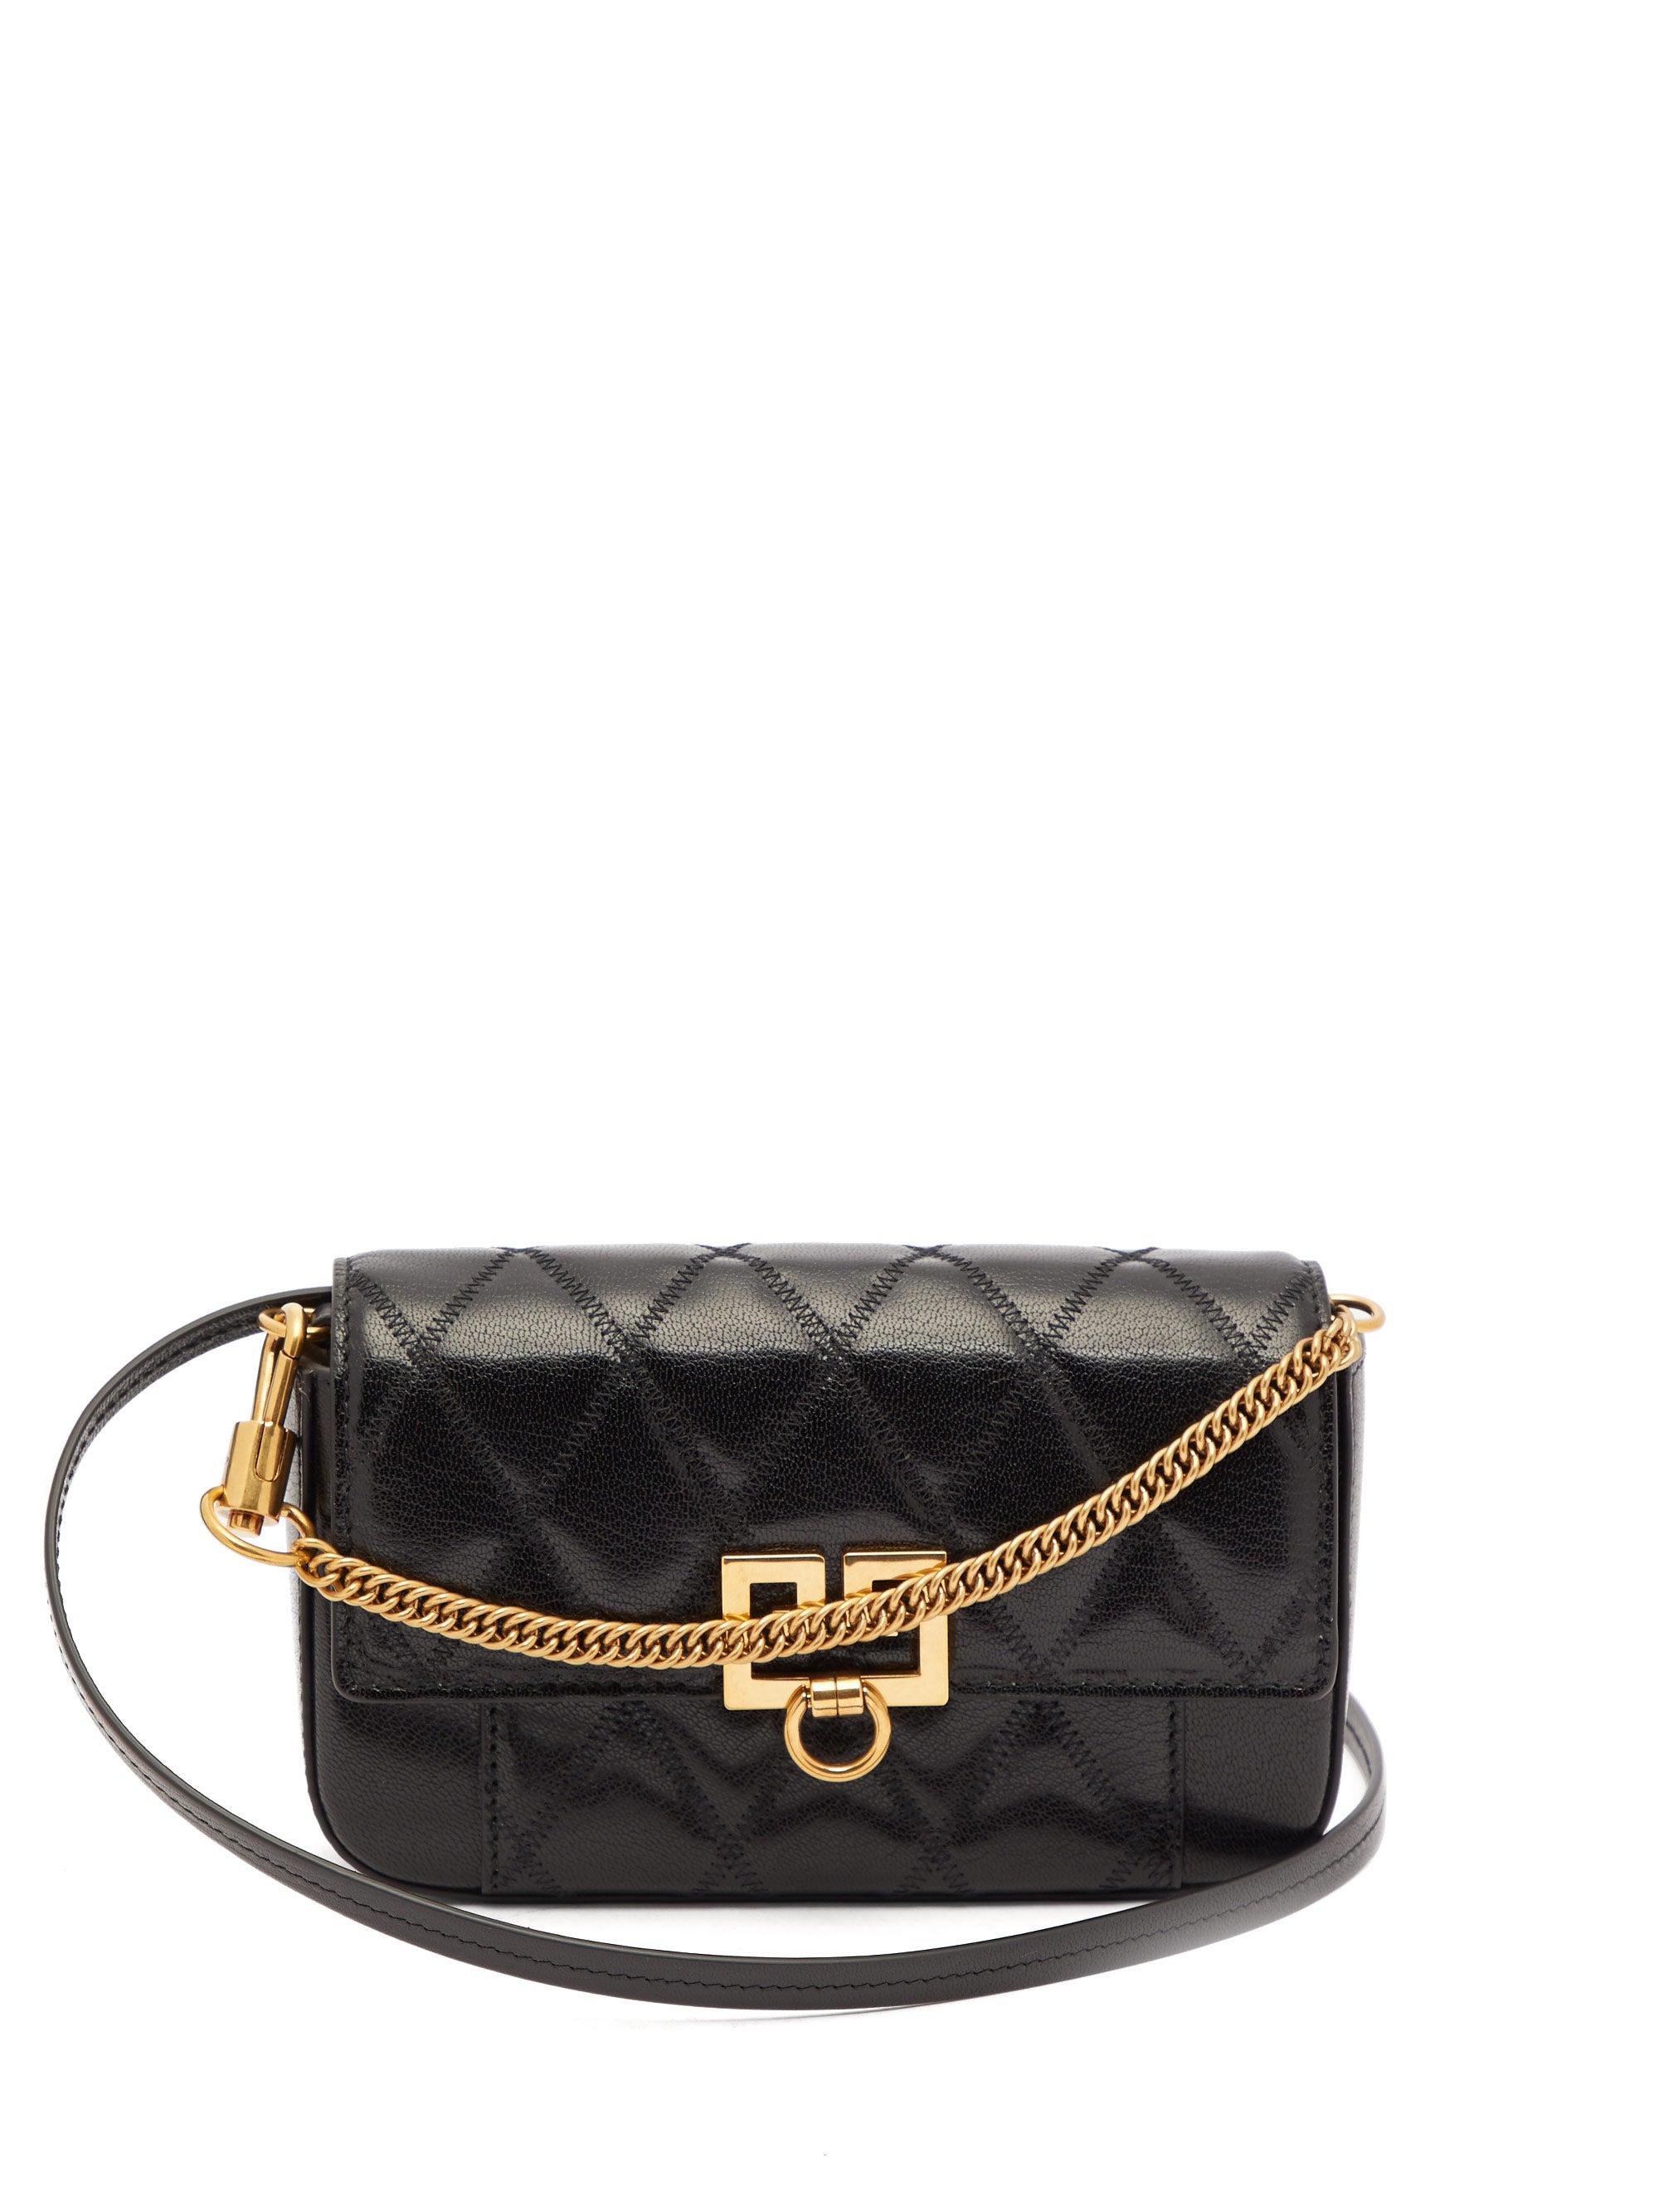 Givenchy Gv3 Mini Leather Cross-body Bag in Black - Lyst